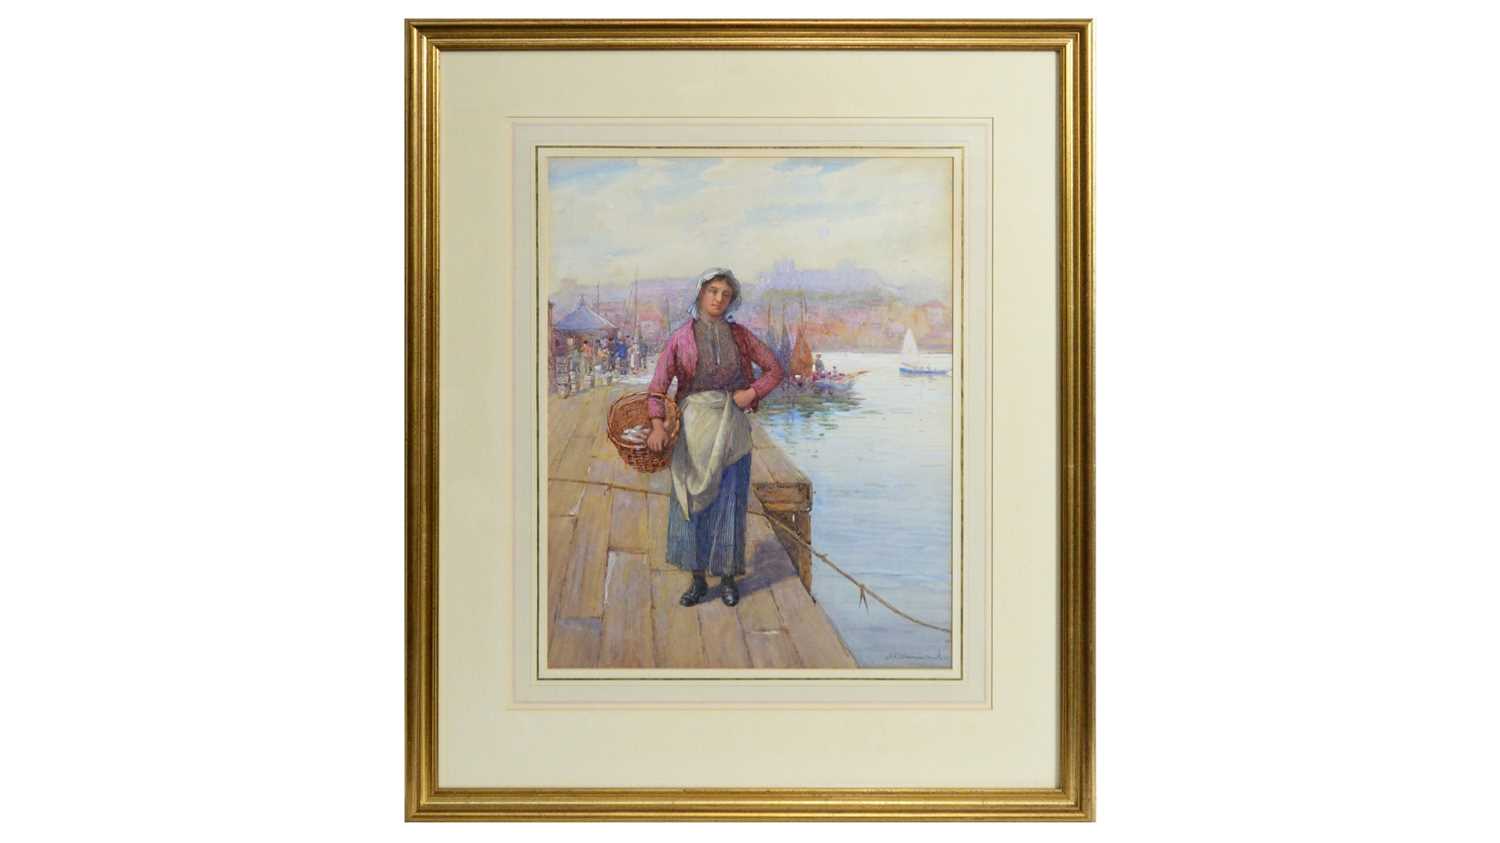 Lot 595 - James Drummond - A Fisherwoman in Whitby Harbour | watercolour